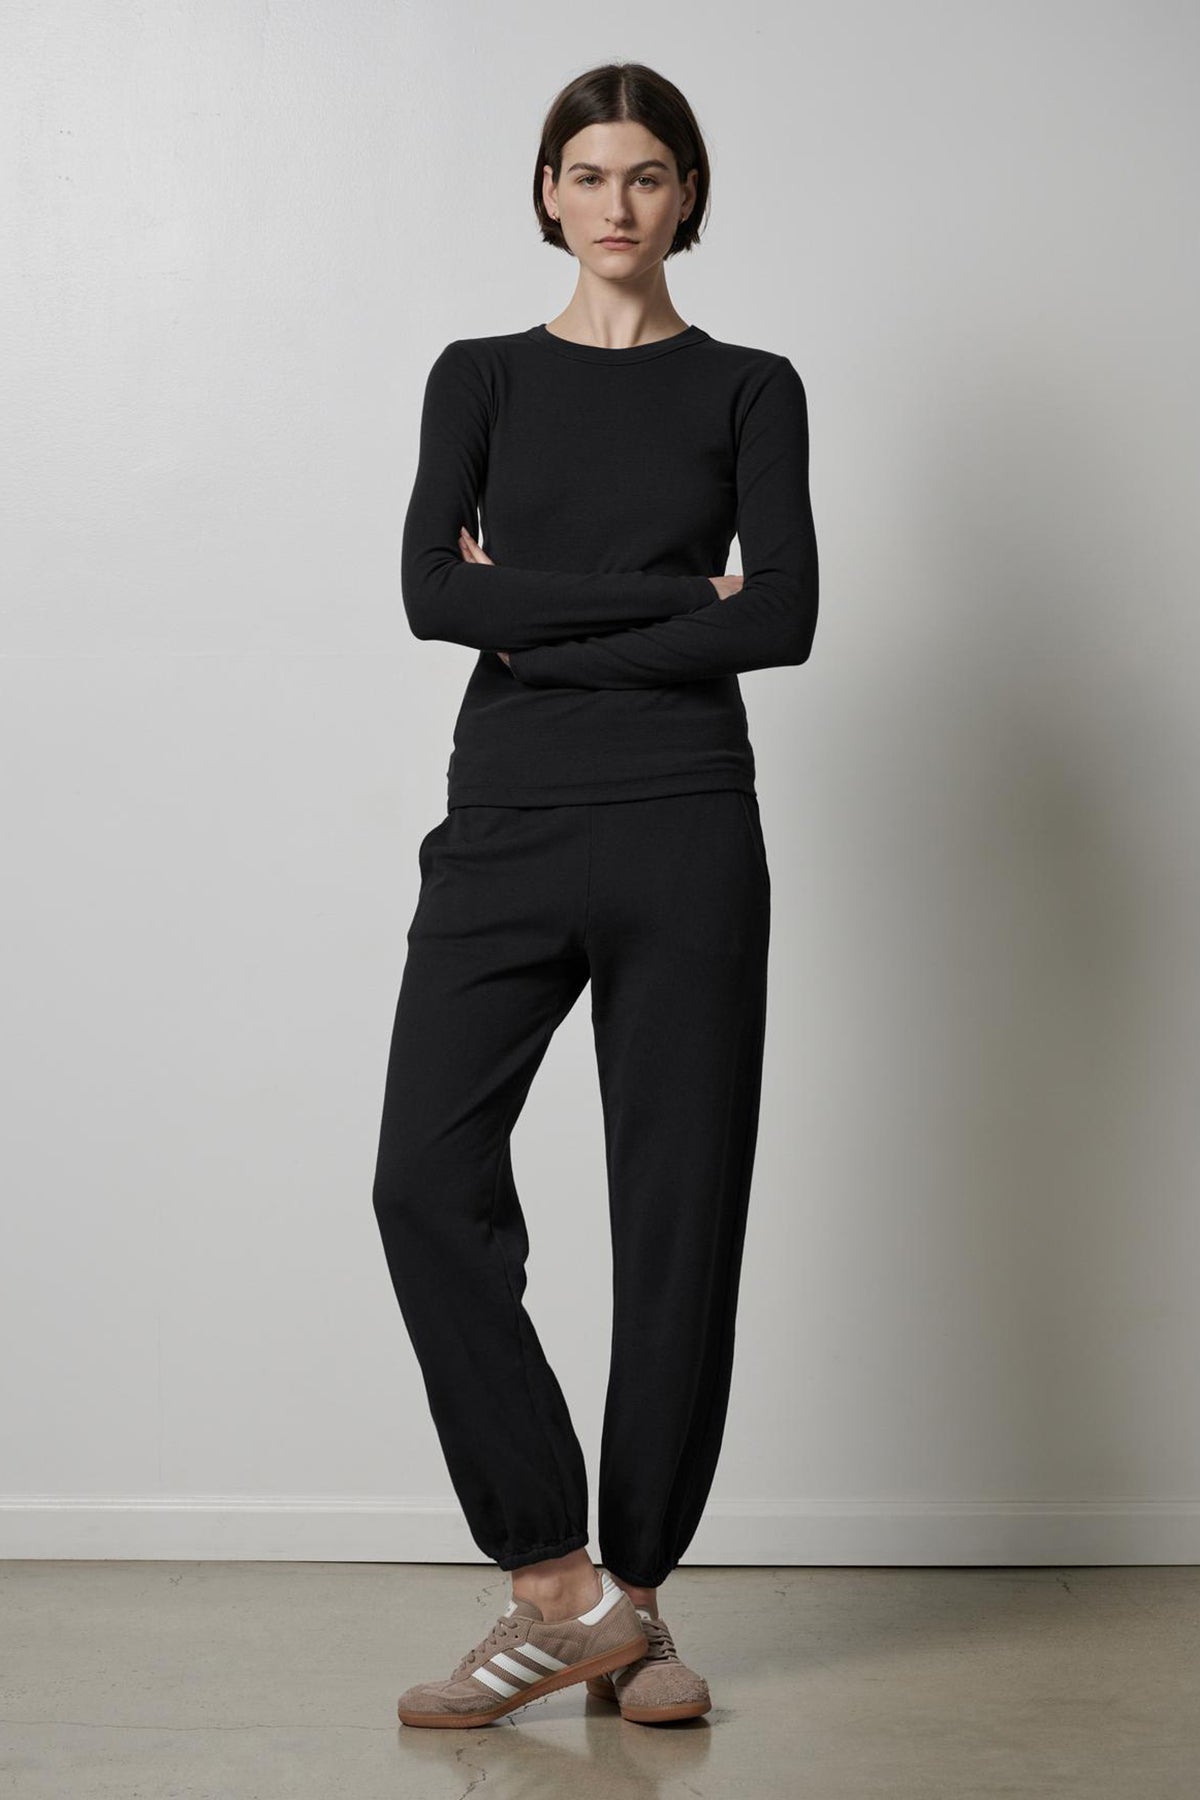 A woman wearing a black long-sleeved top and ZUMA SWEATPANT made from organic cotton. Brand Name: Velvet by Jenny Graham.-35190174187713